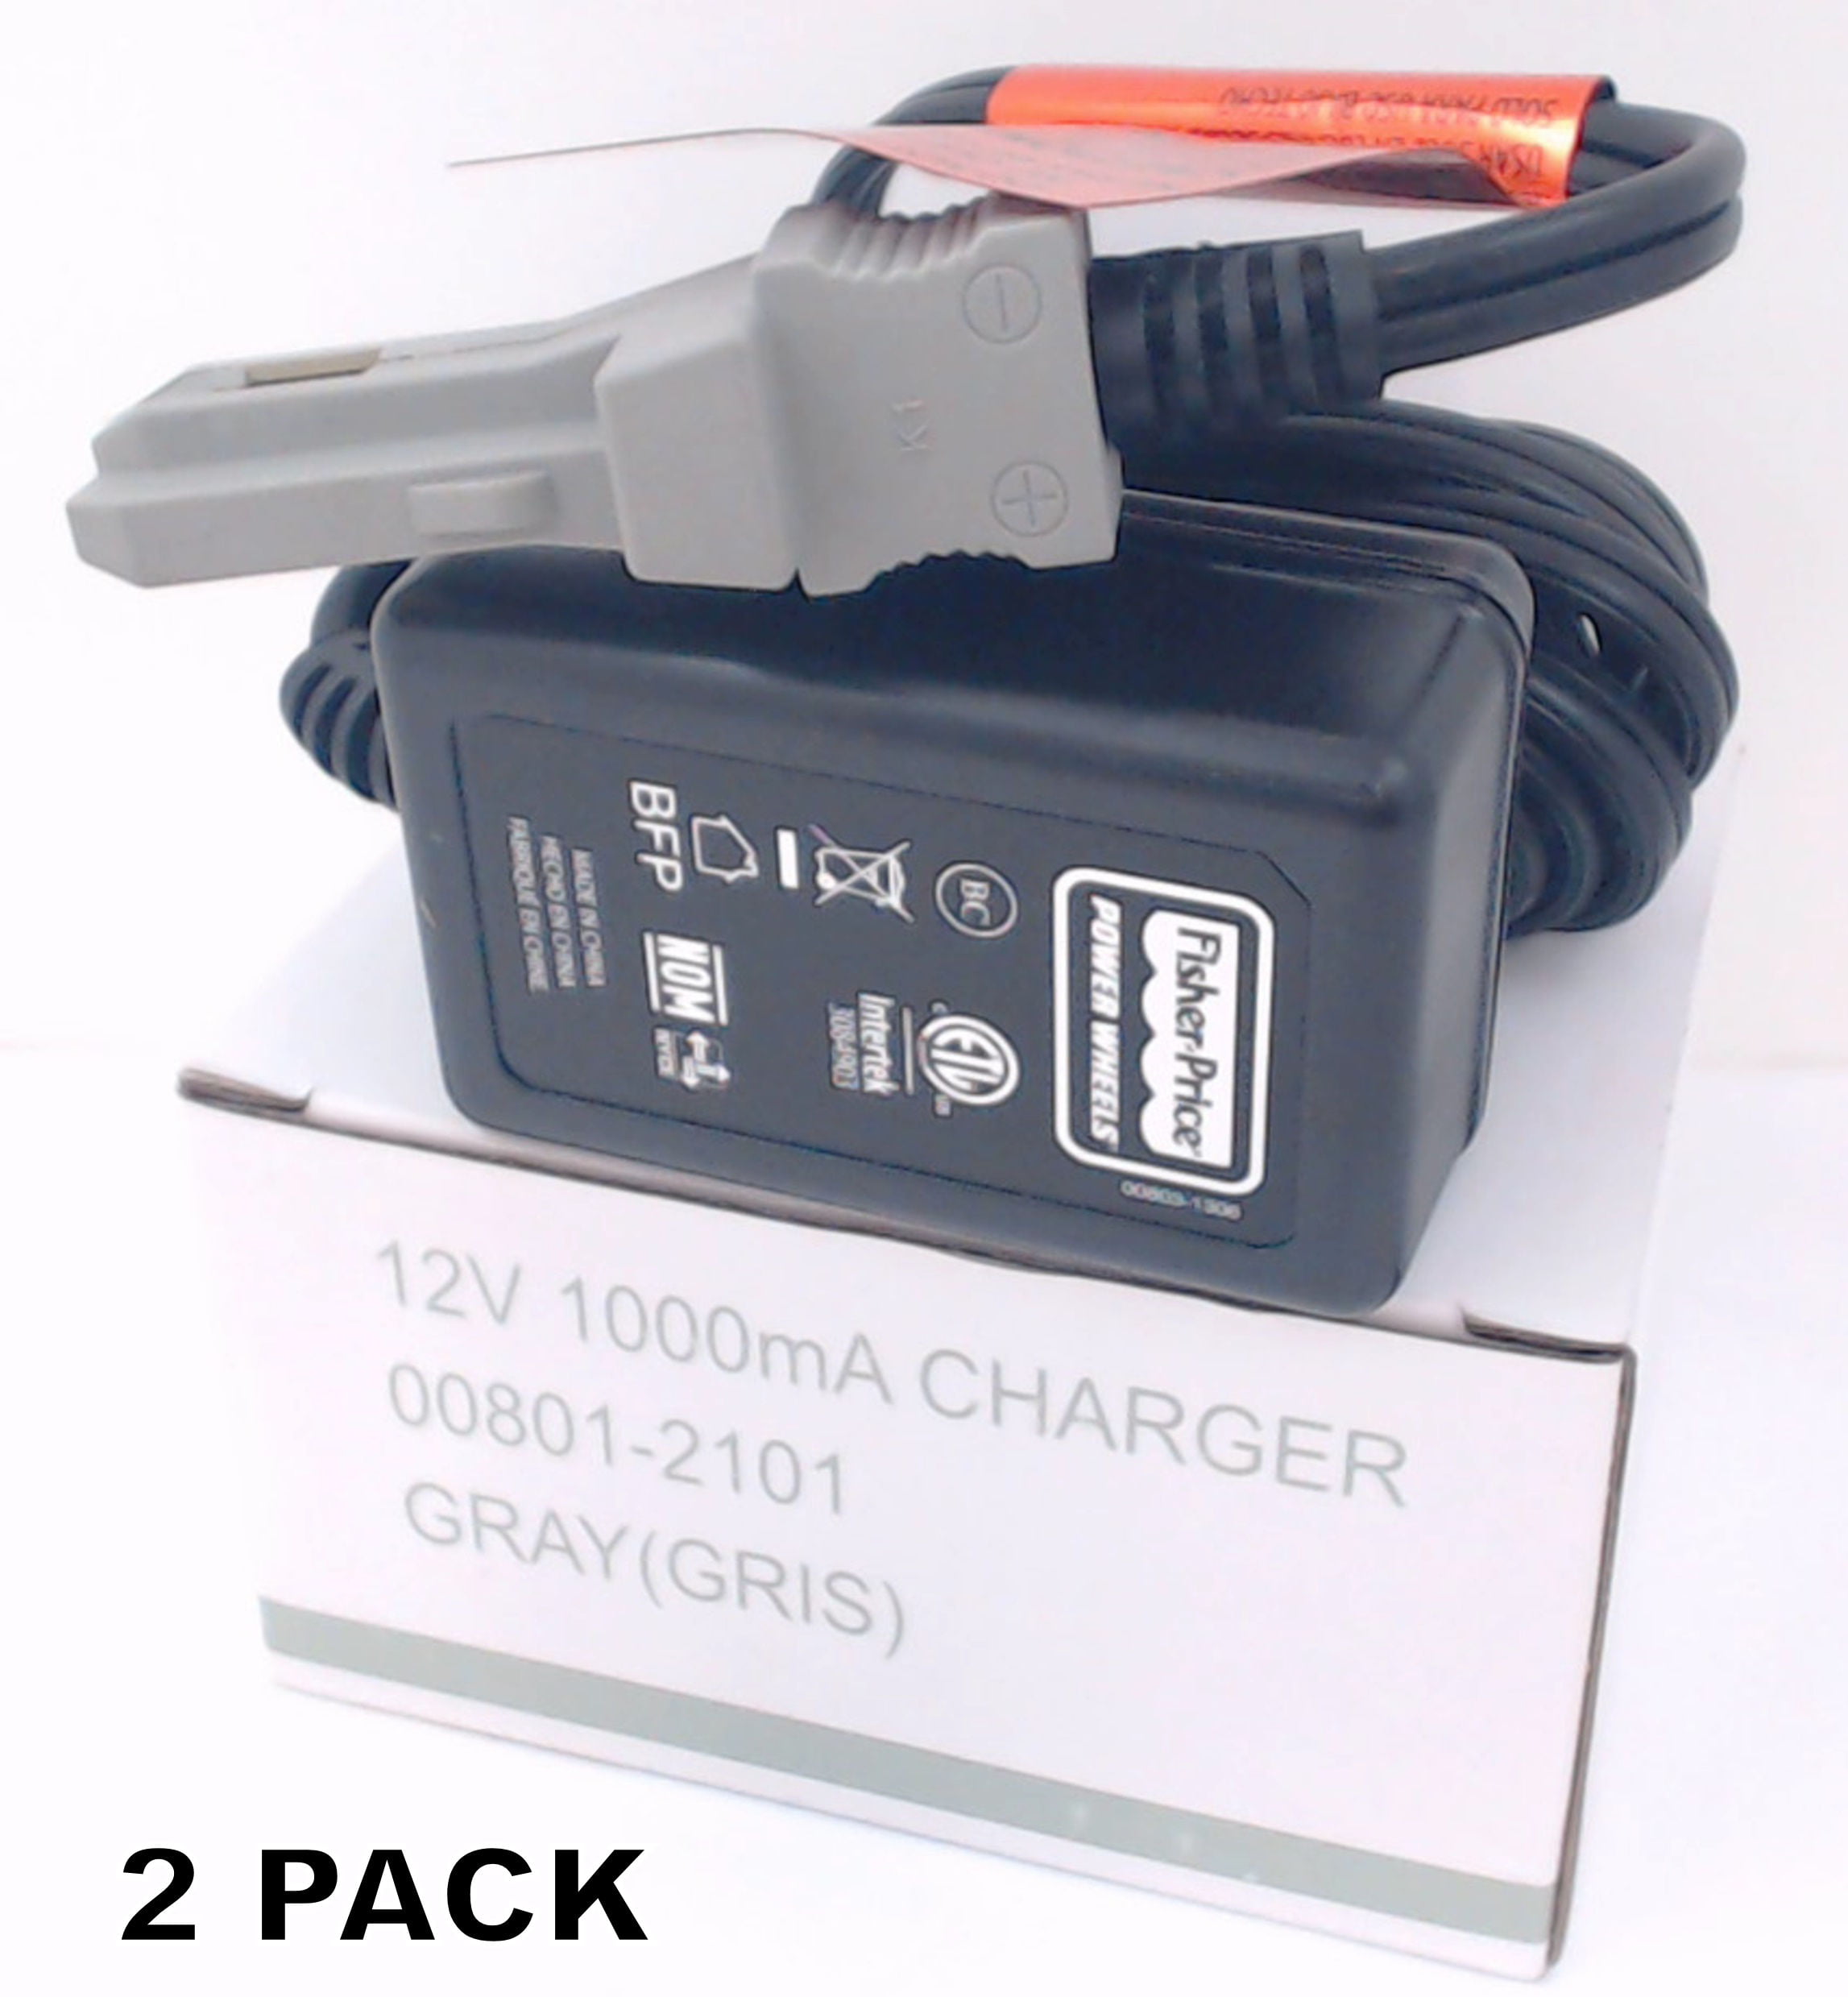 00801-1778 Power Wheels Grey 12V grey Battery Charger 00801-1480 00801-2101 